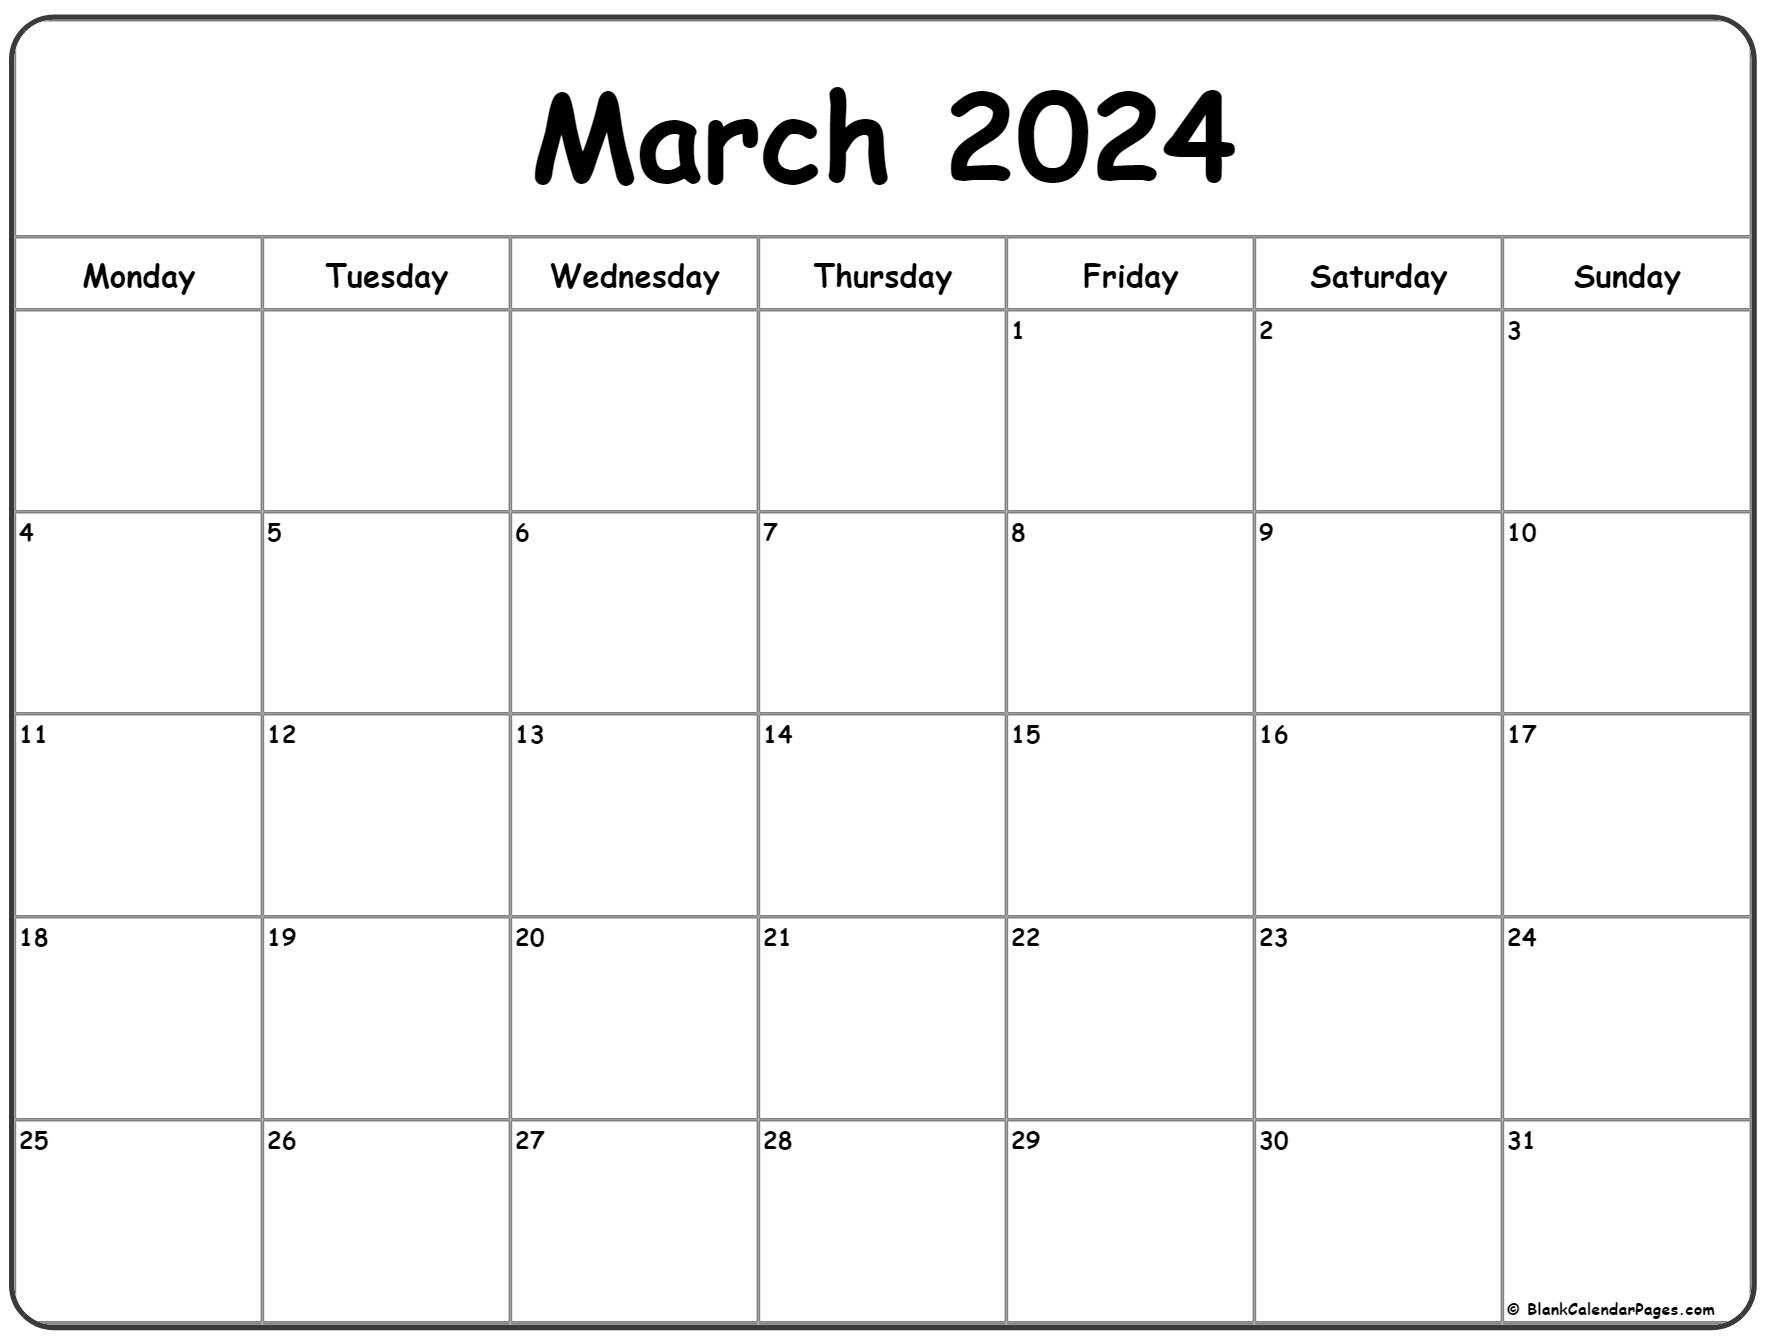 Monthly Calendar 2022 March March 2022 Monday Calendar | Monday To Sunday